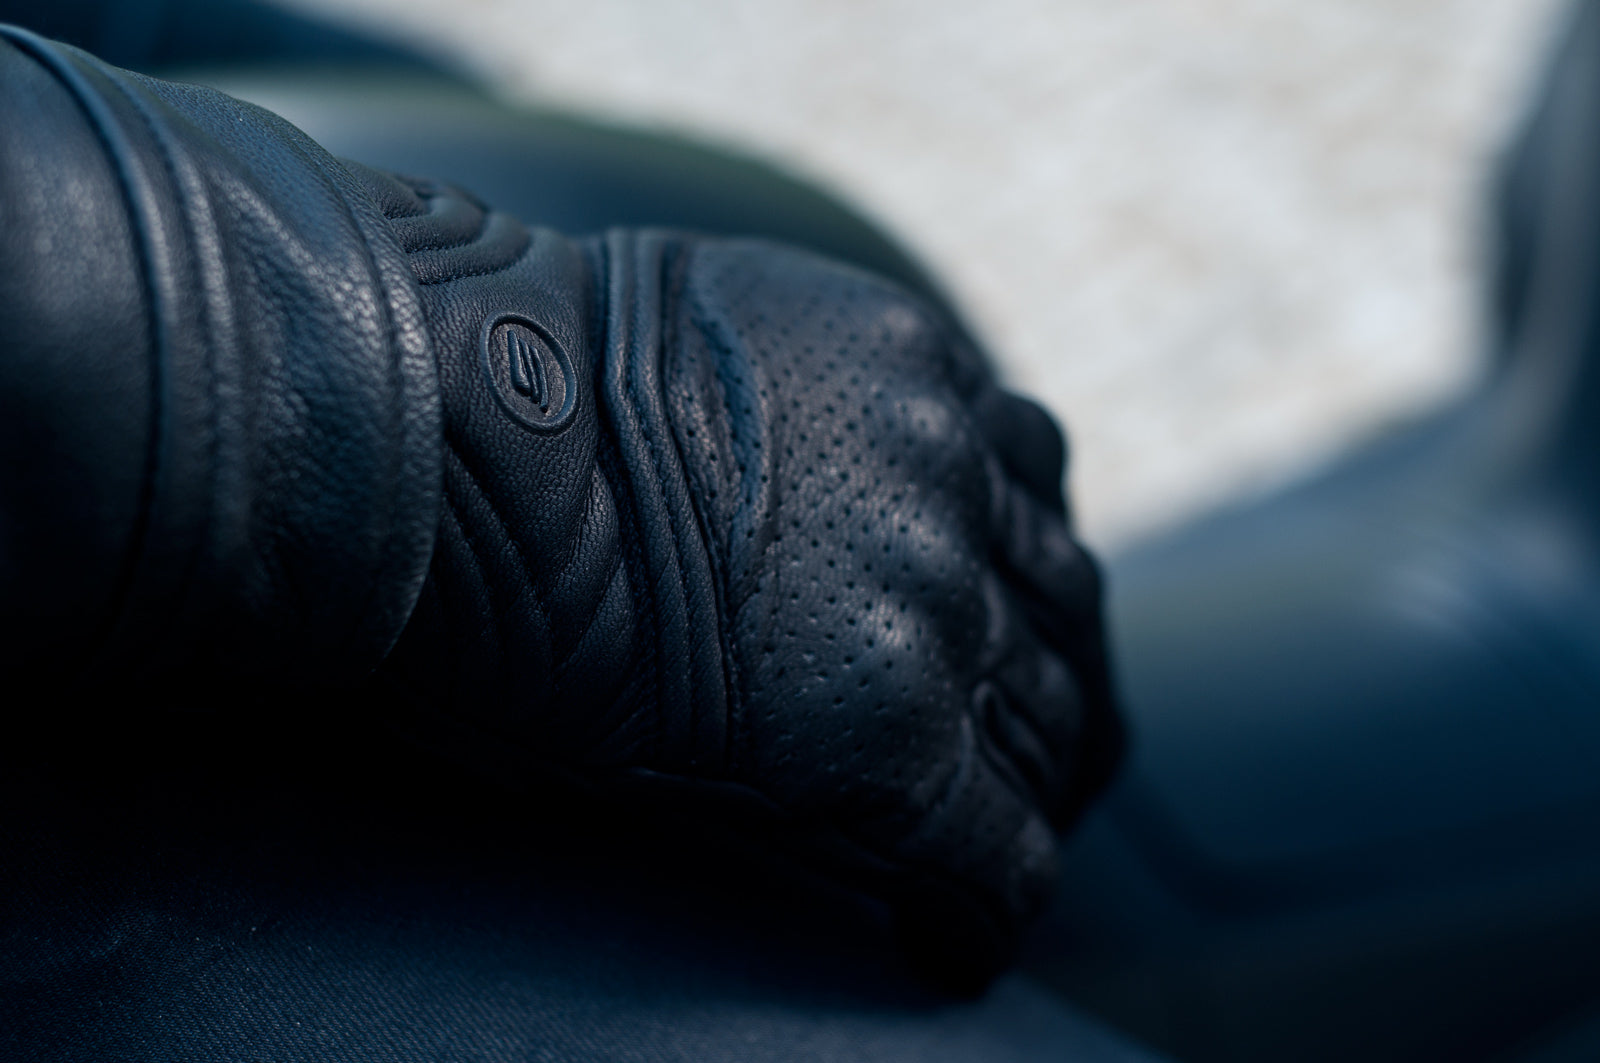 Black leather female motorcycle glove from Shima close up